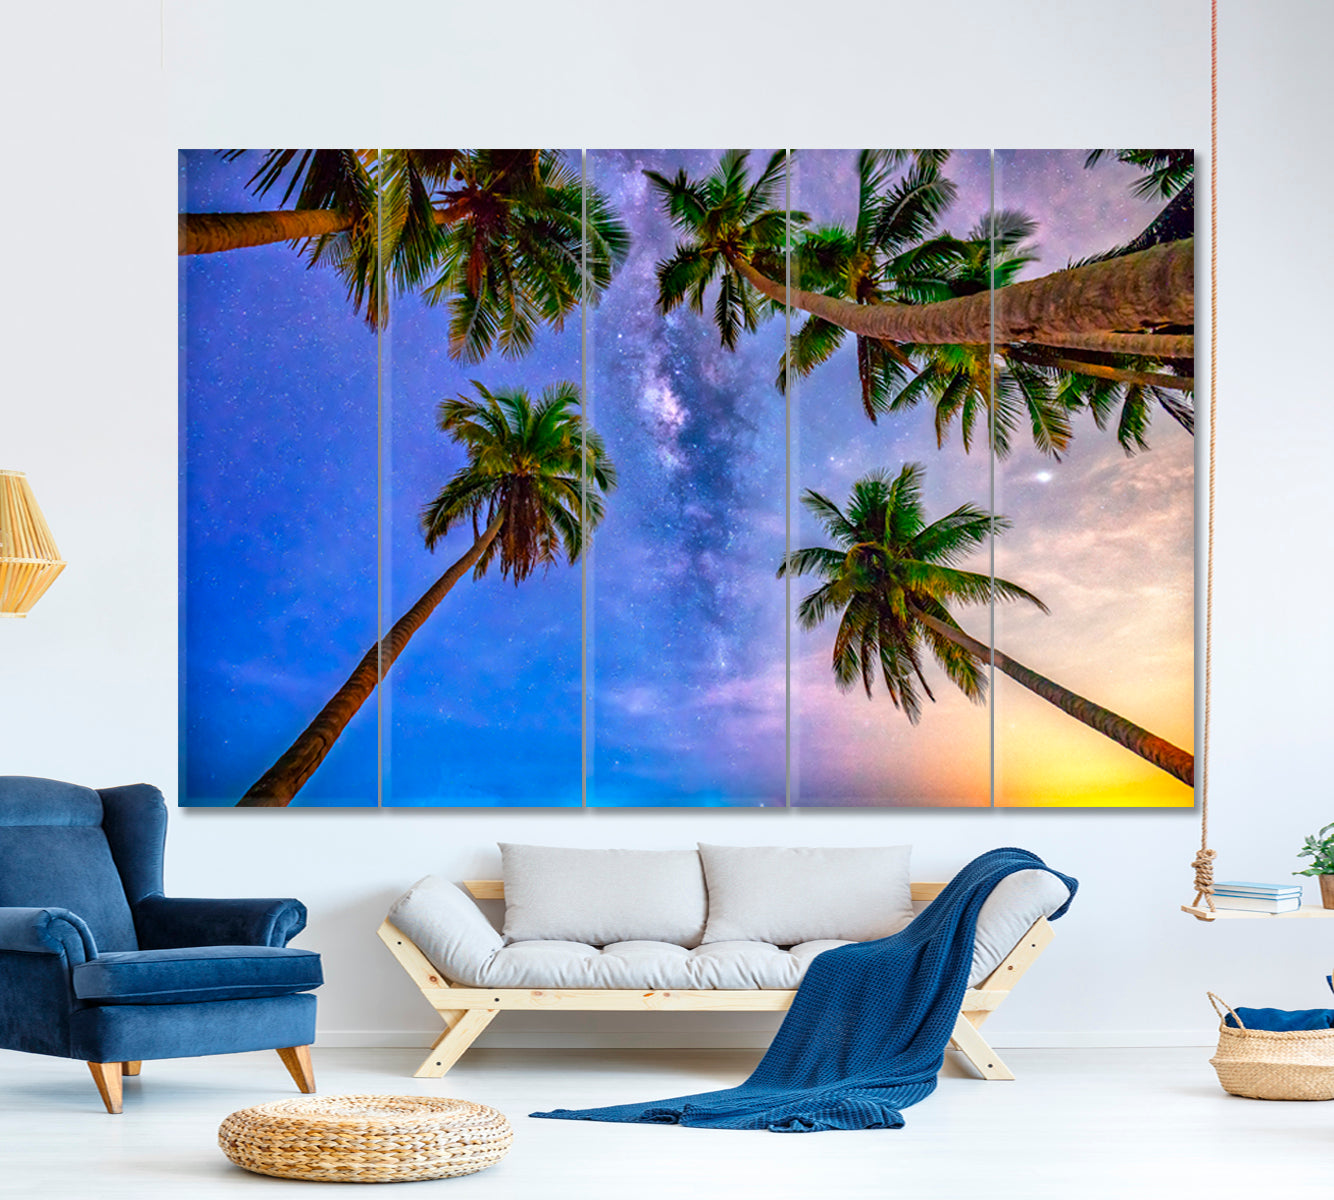 Coconut Palms Trees Milky Way Sky on a beautiful Summer Night Landscape Tropical, Exotic Art Print Artesty 5 panels 36" x 24" 